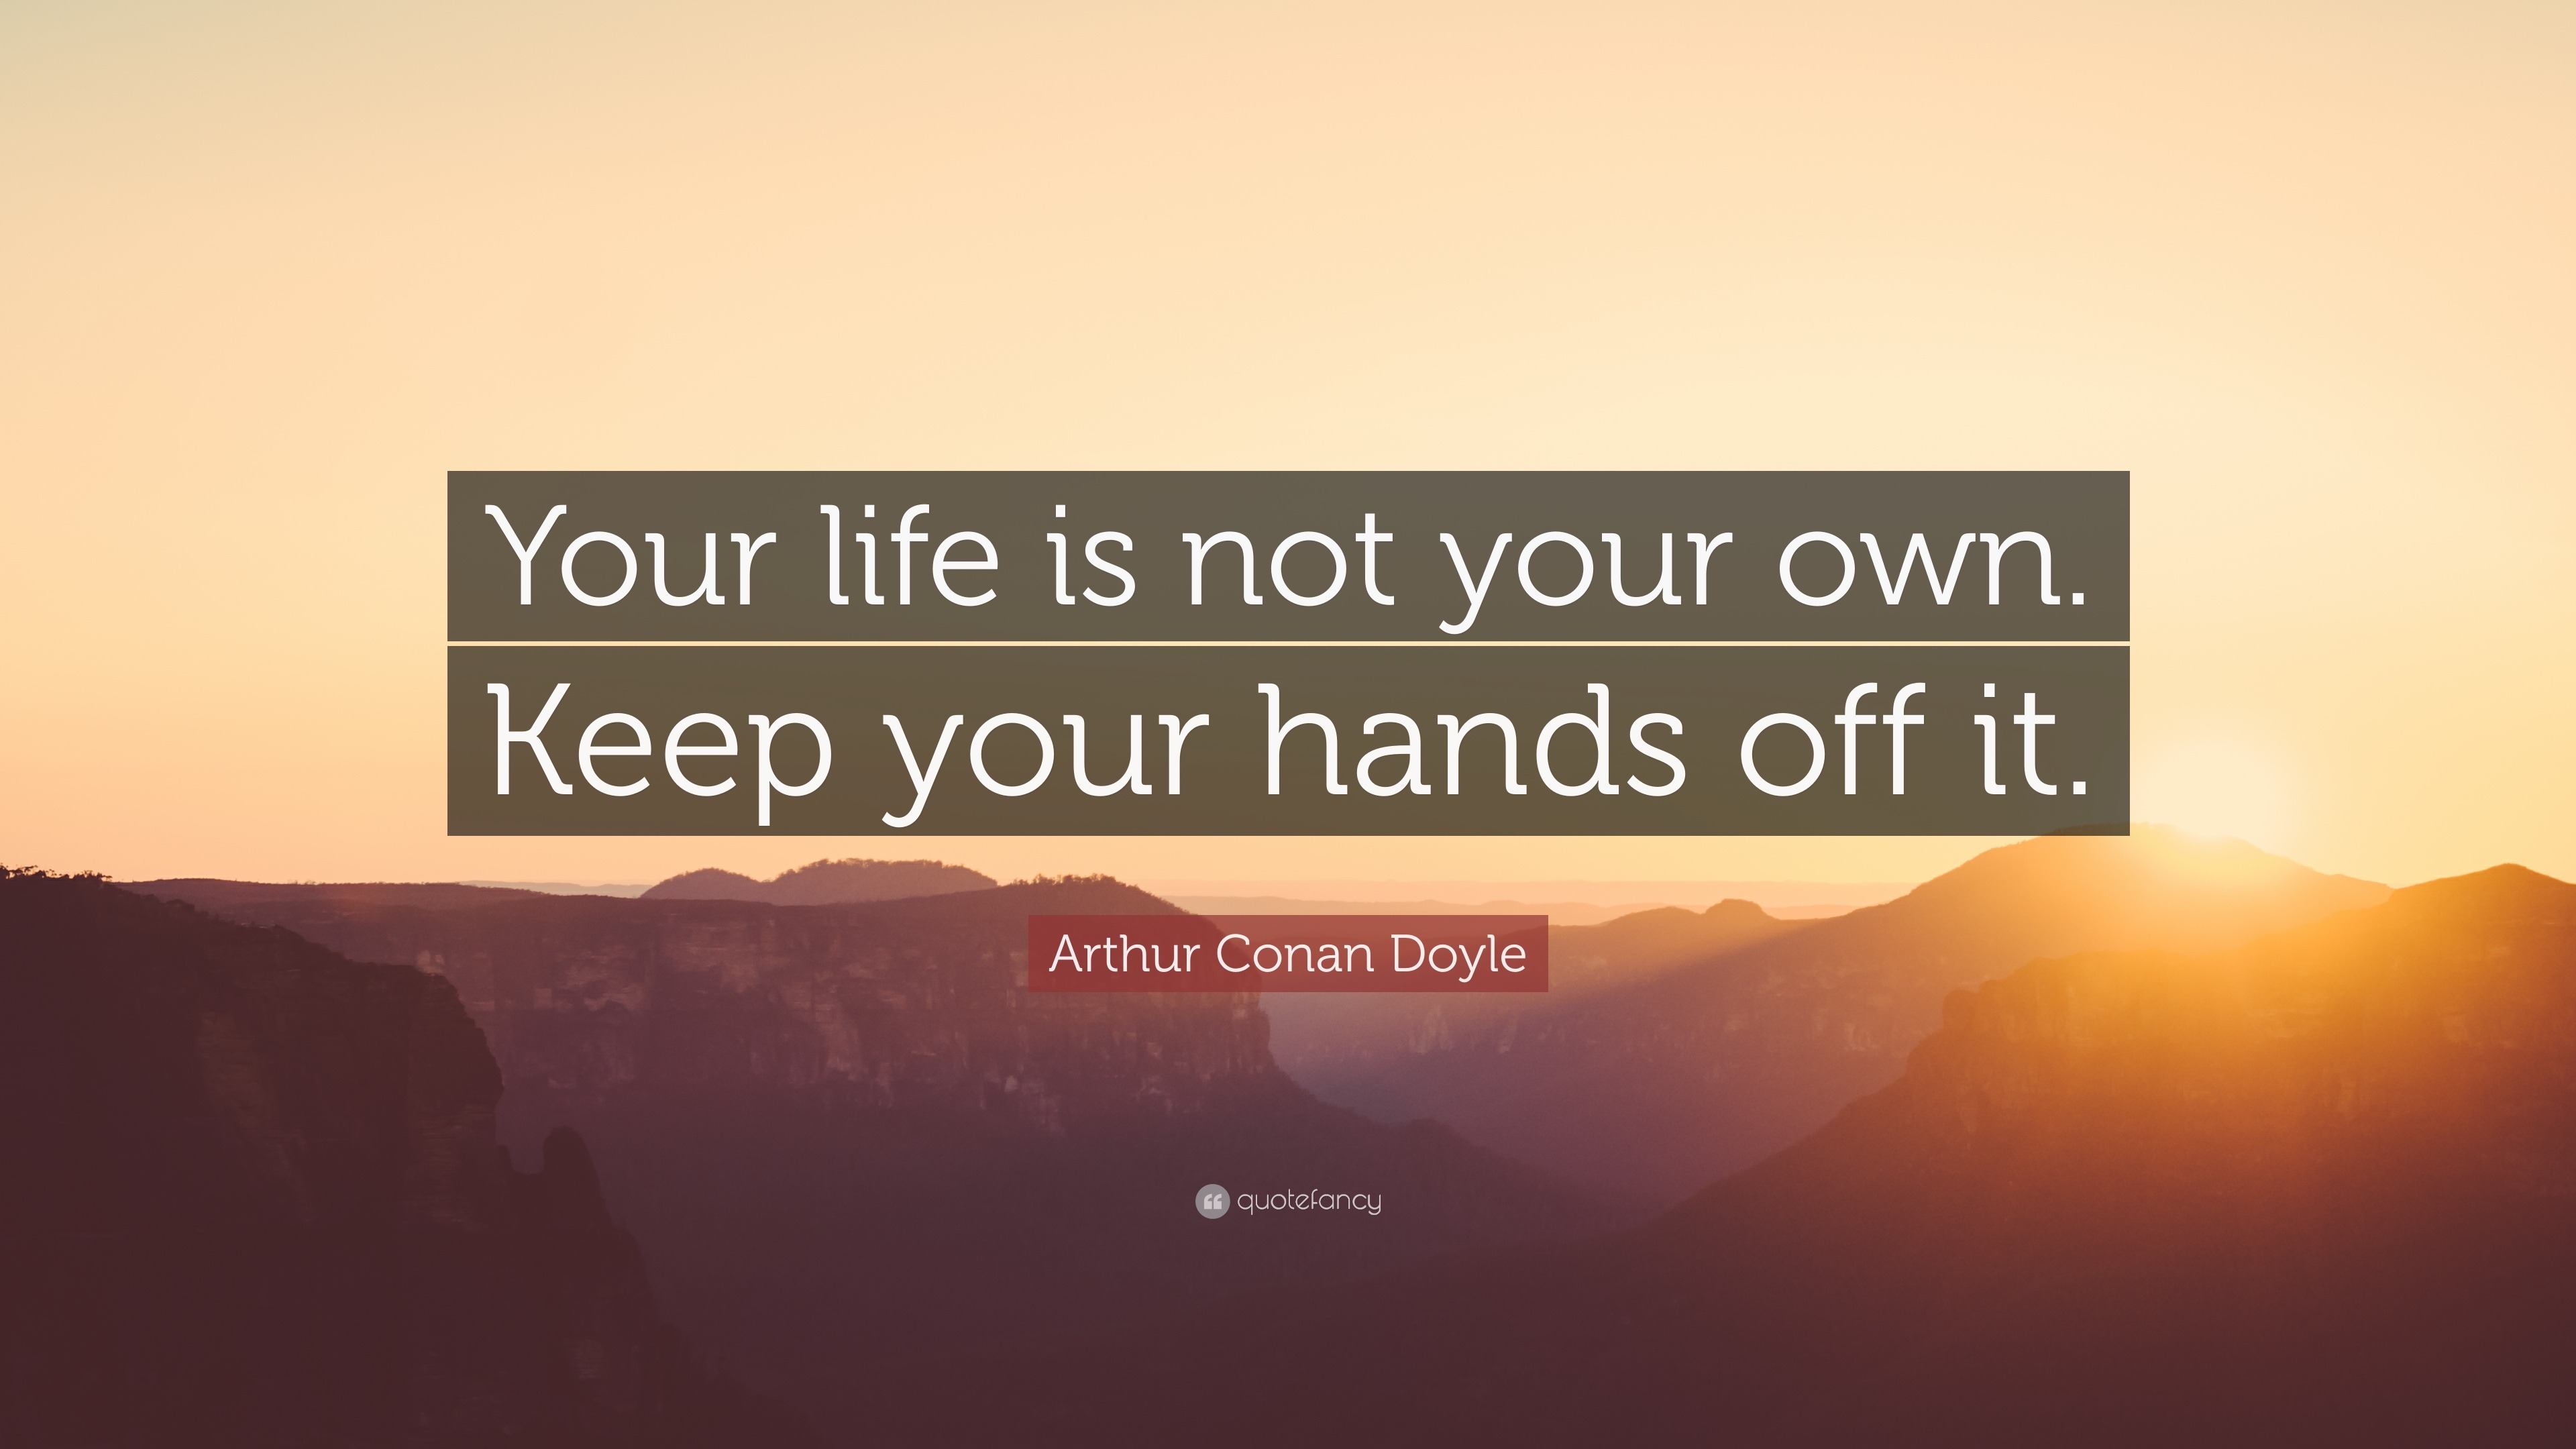 Arthur Conan Doyle Quote Your Life Is Not Your Own Keep Your Hands Off It